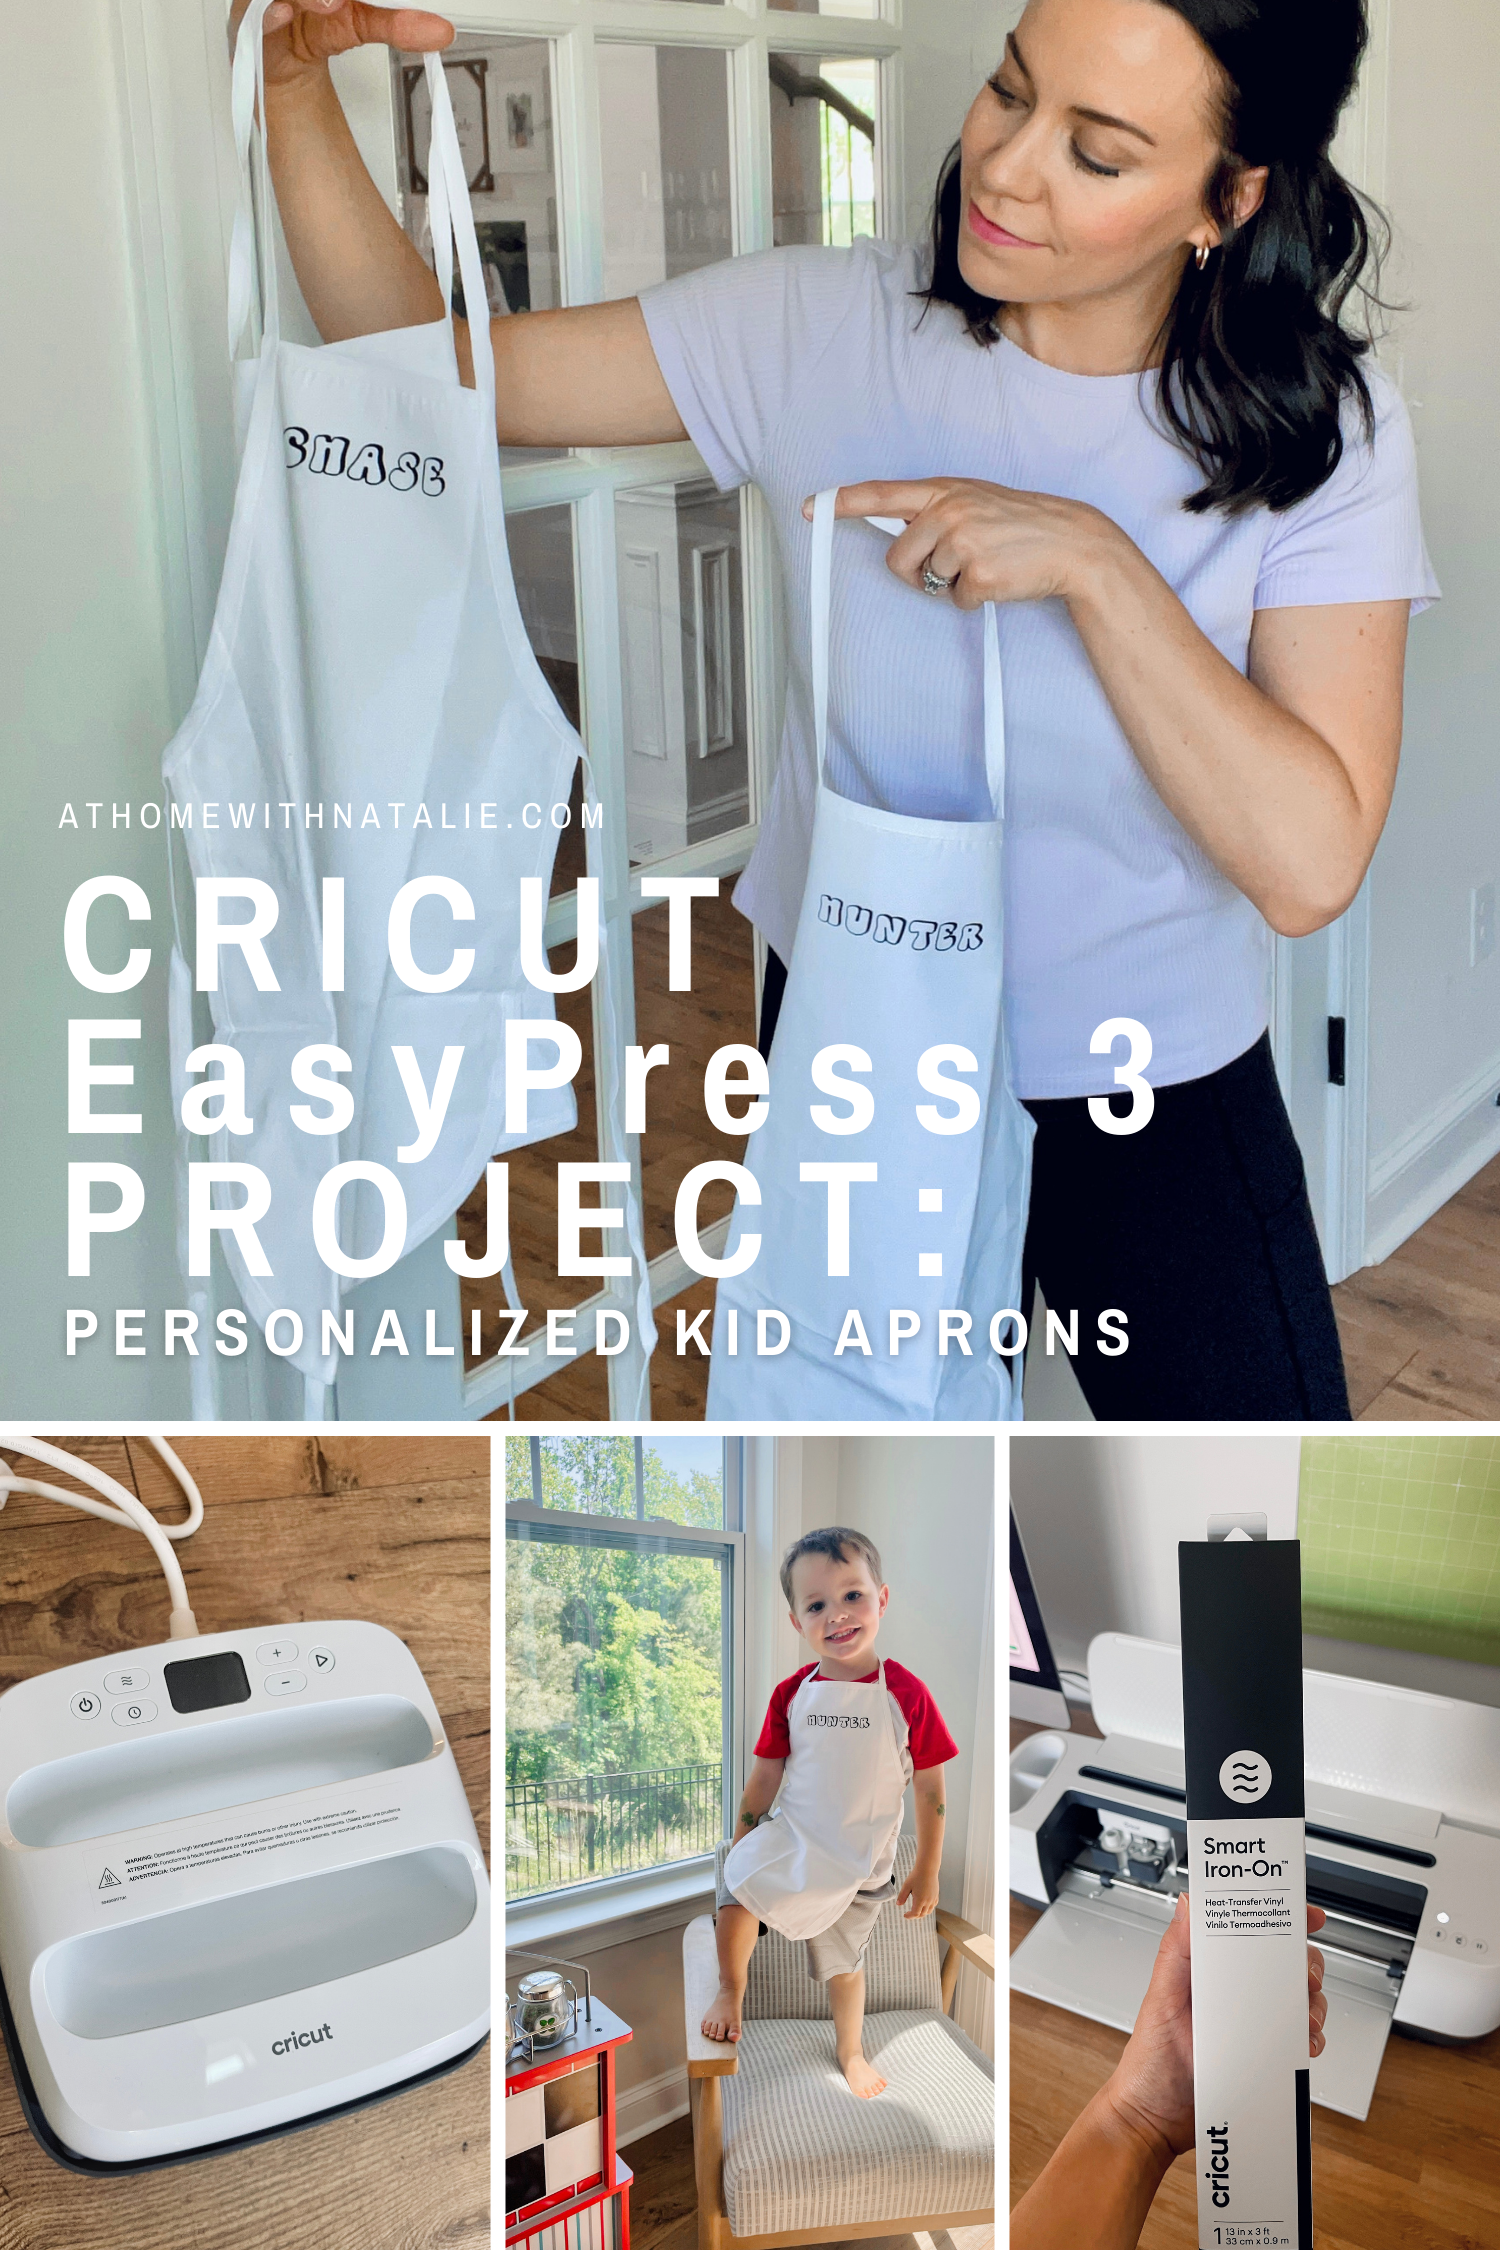 Cricut EasyPress 3 Project – Personalized Kid Aprons – At Home With Natalie